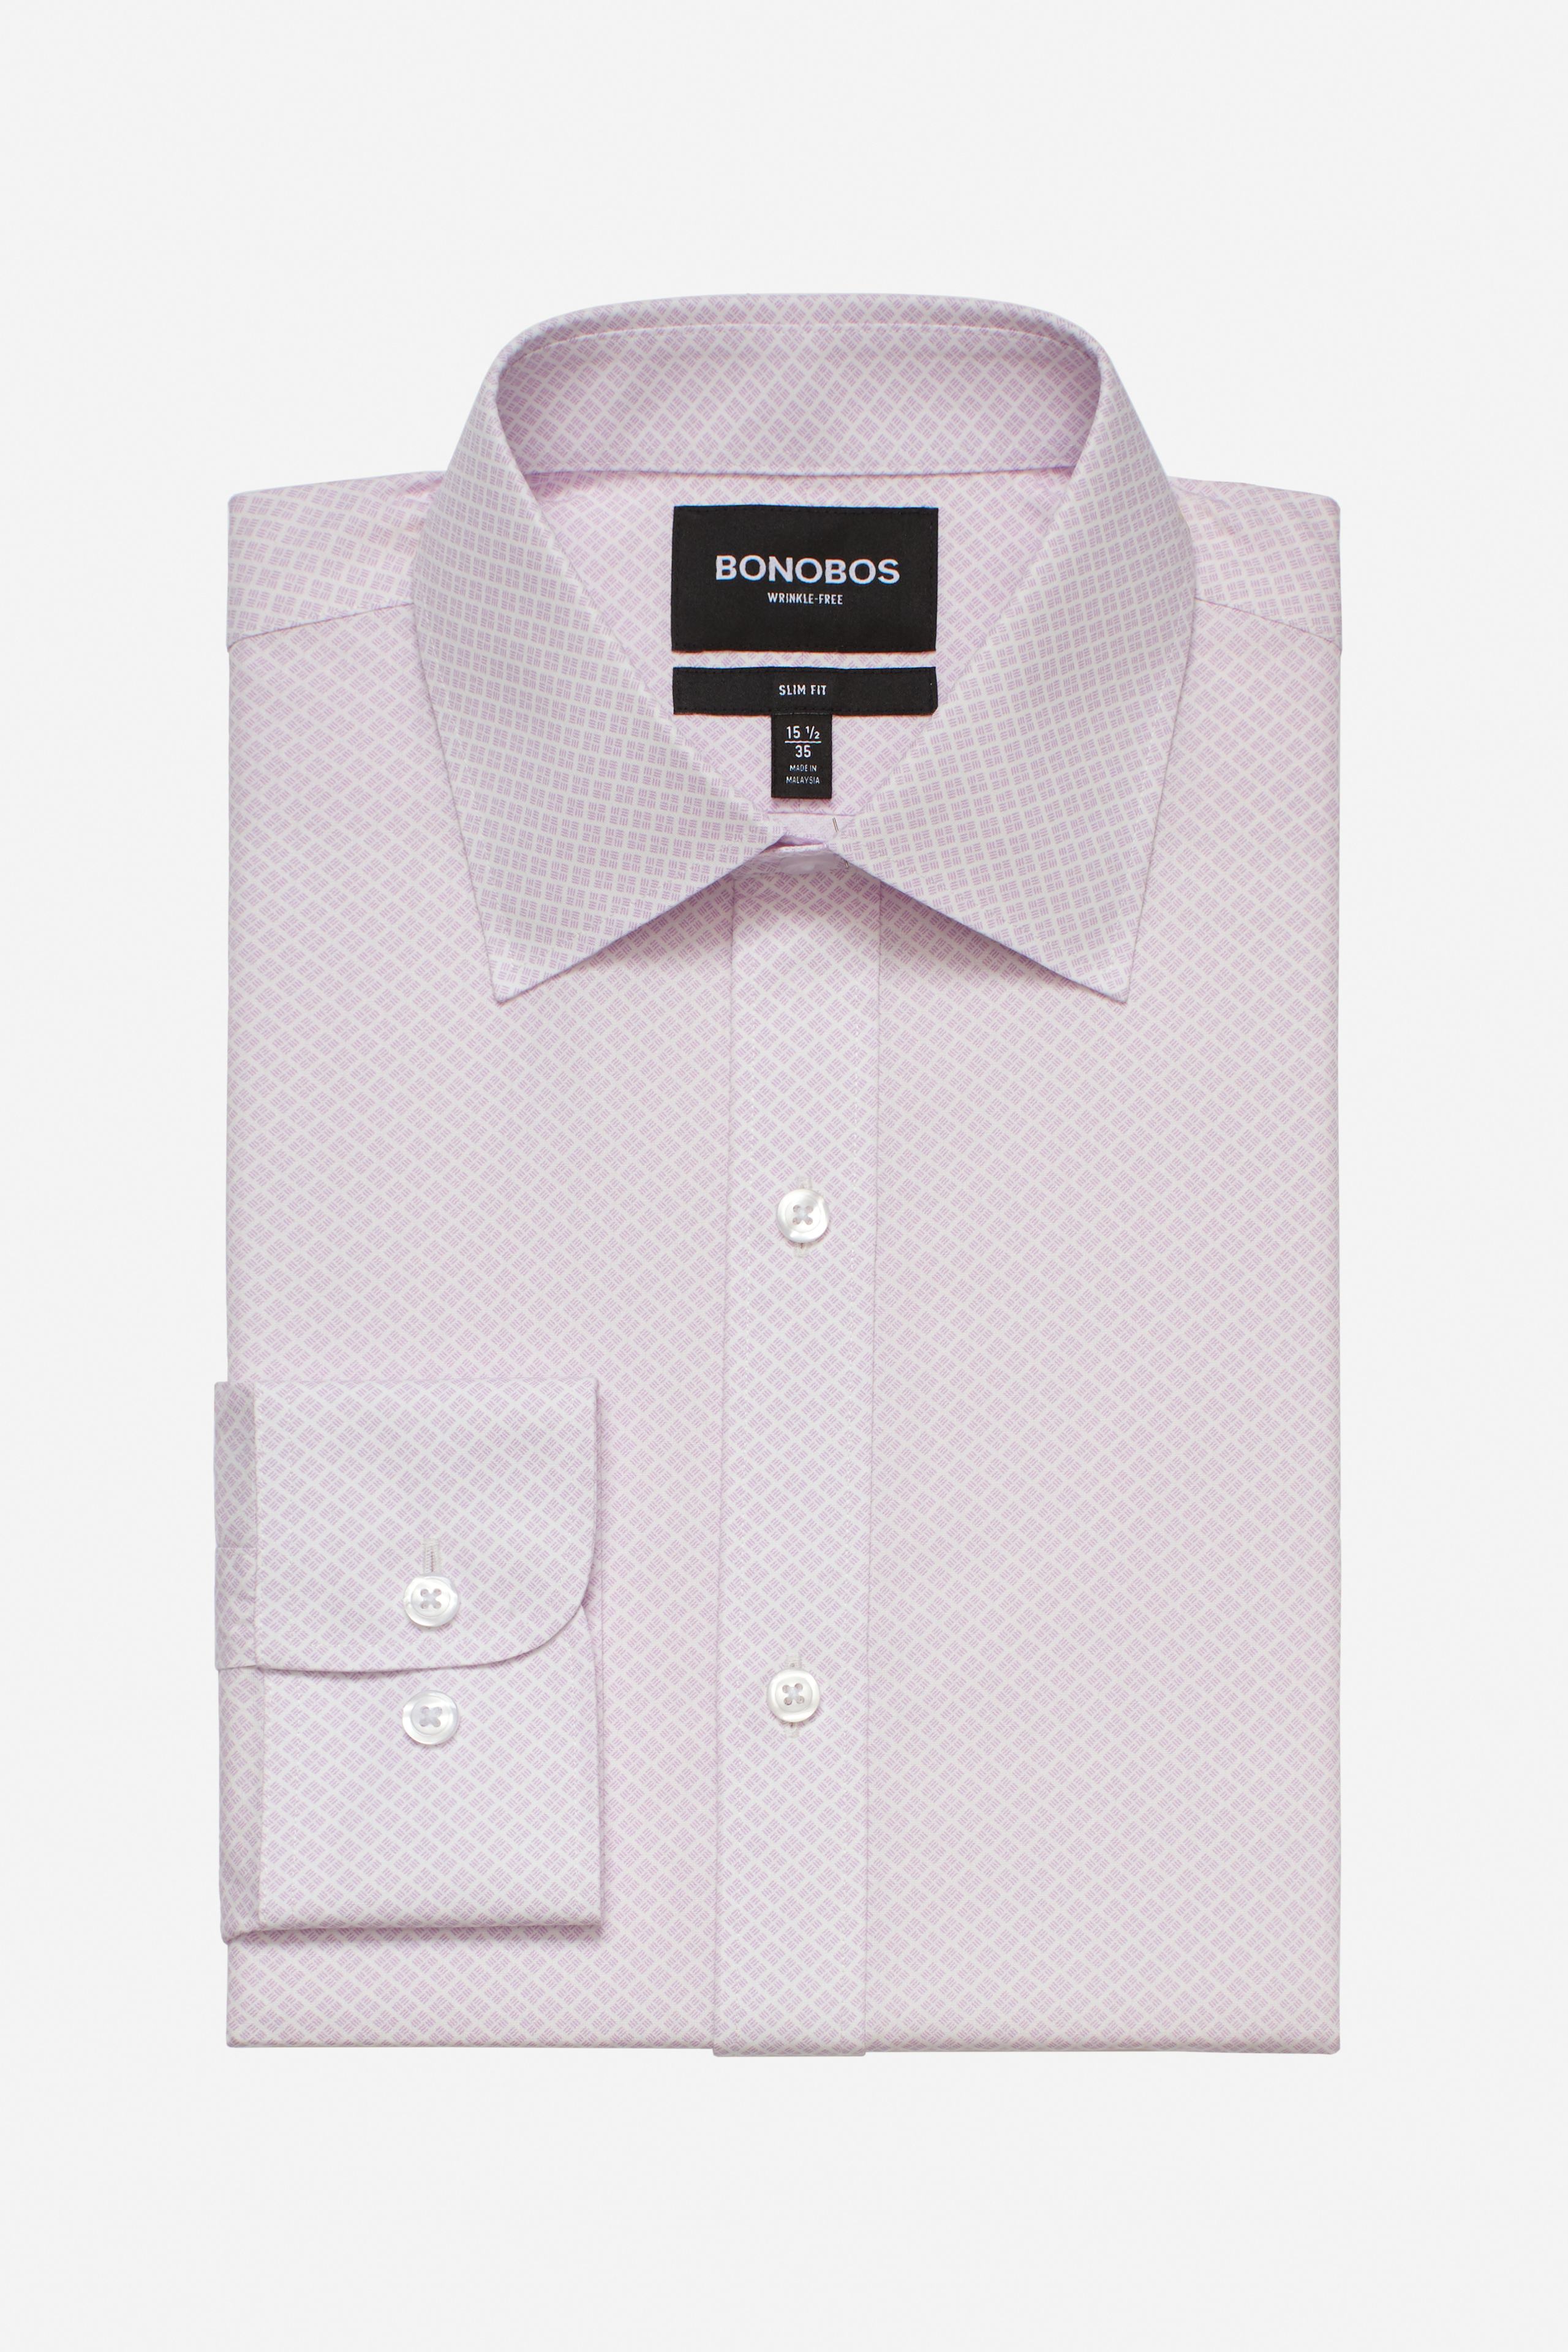 Daily Grind Wrinkle Free Dress Shirt Extended Sizes